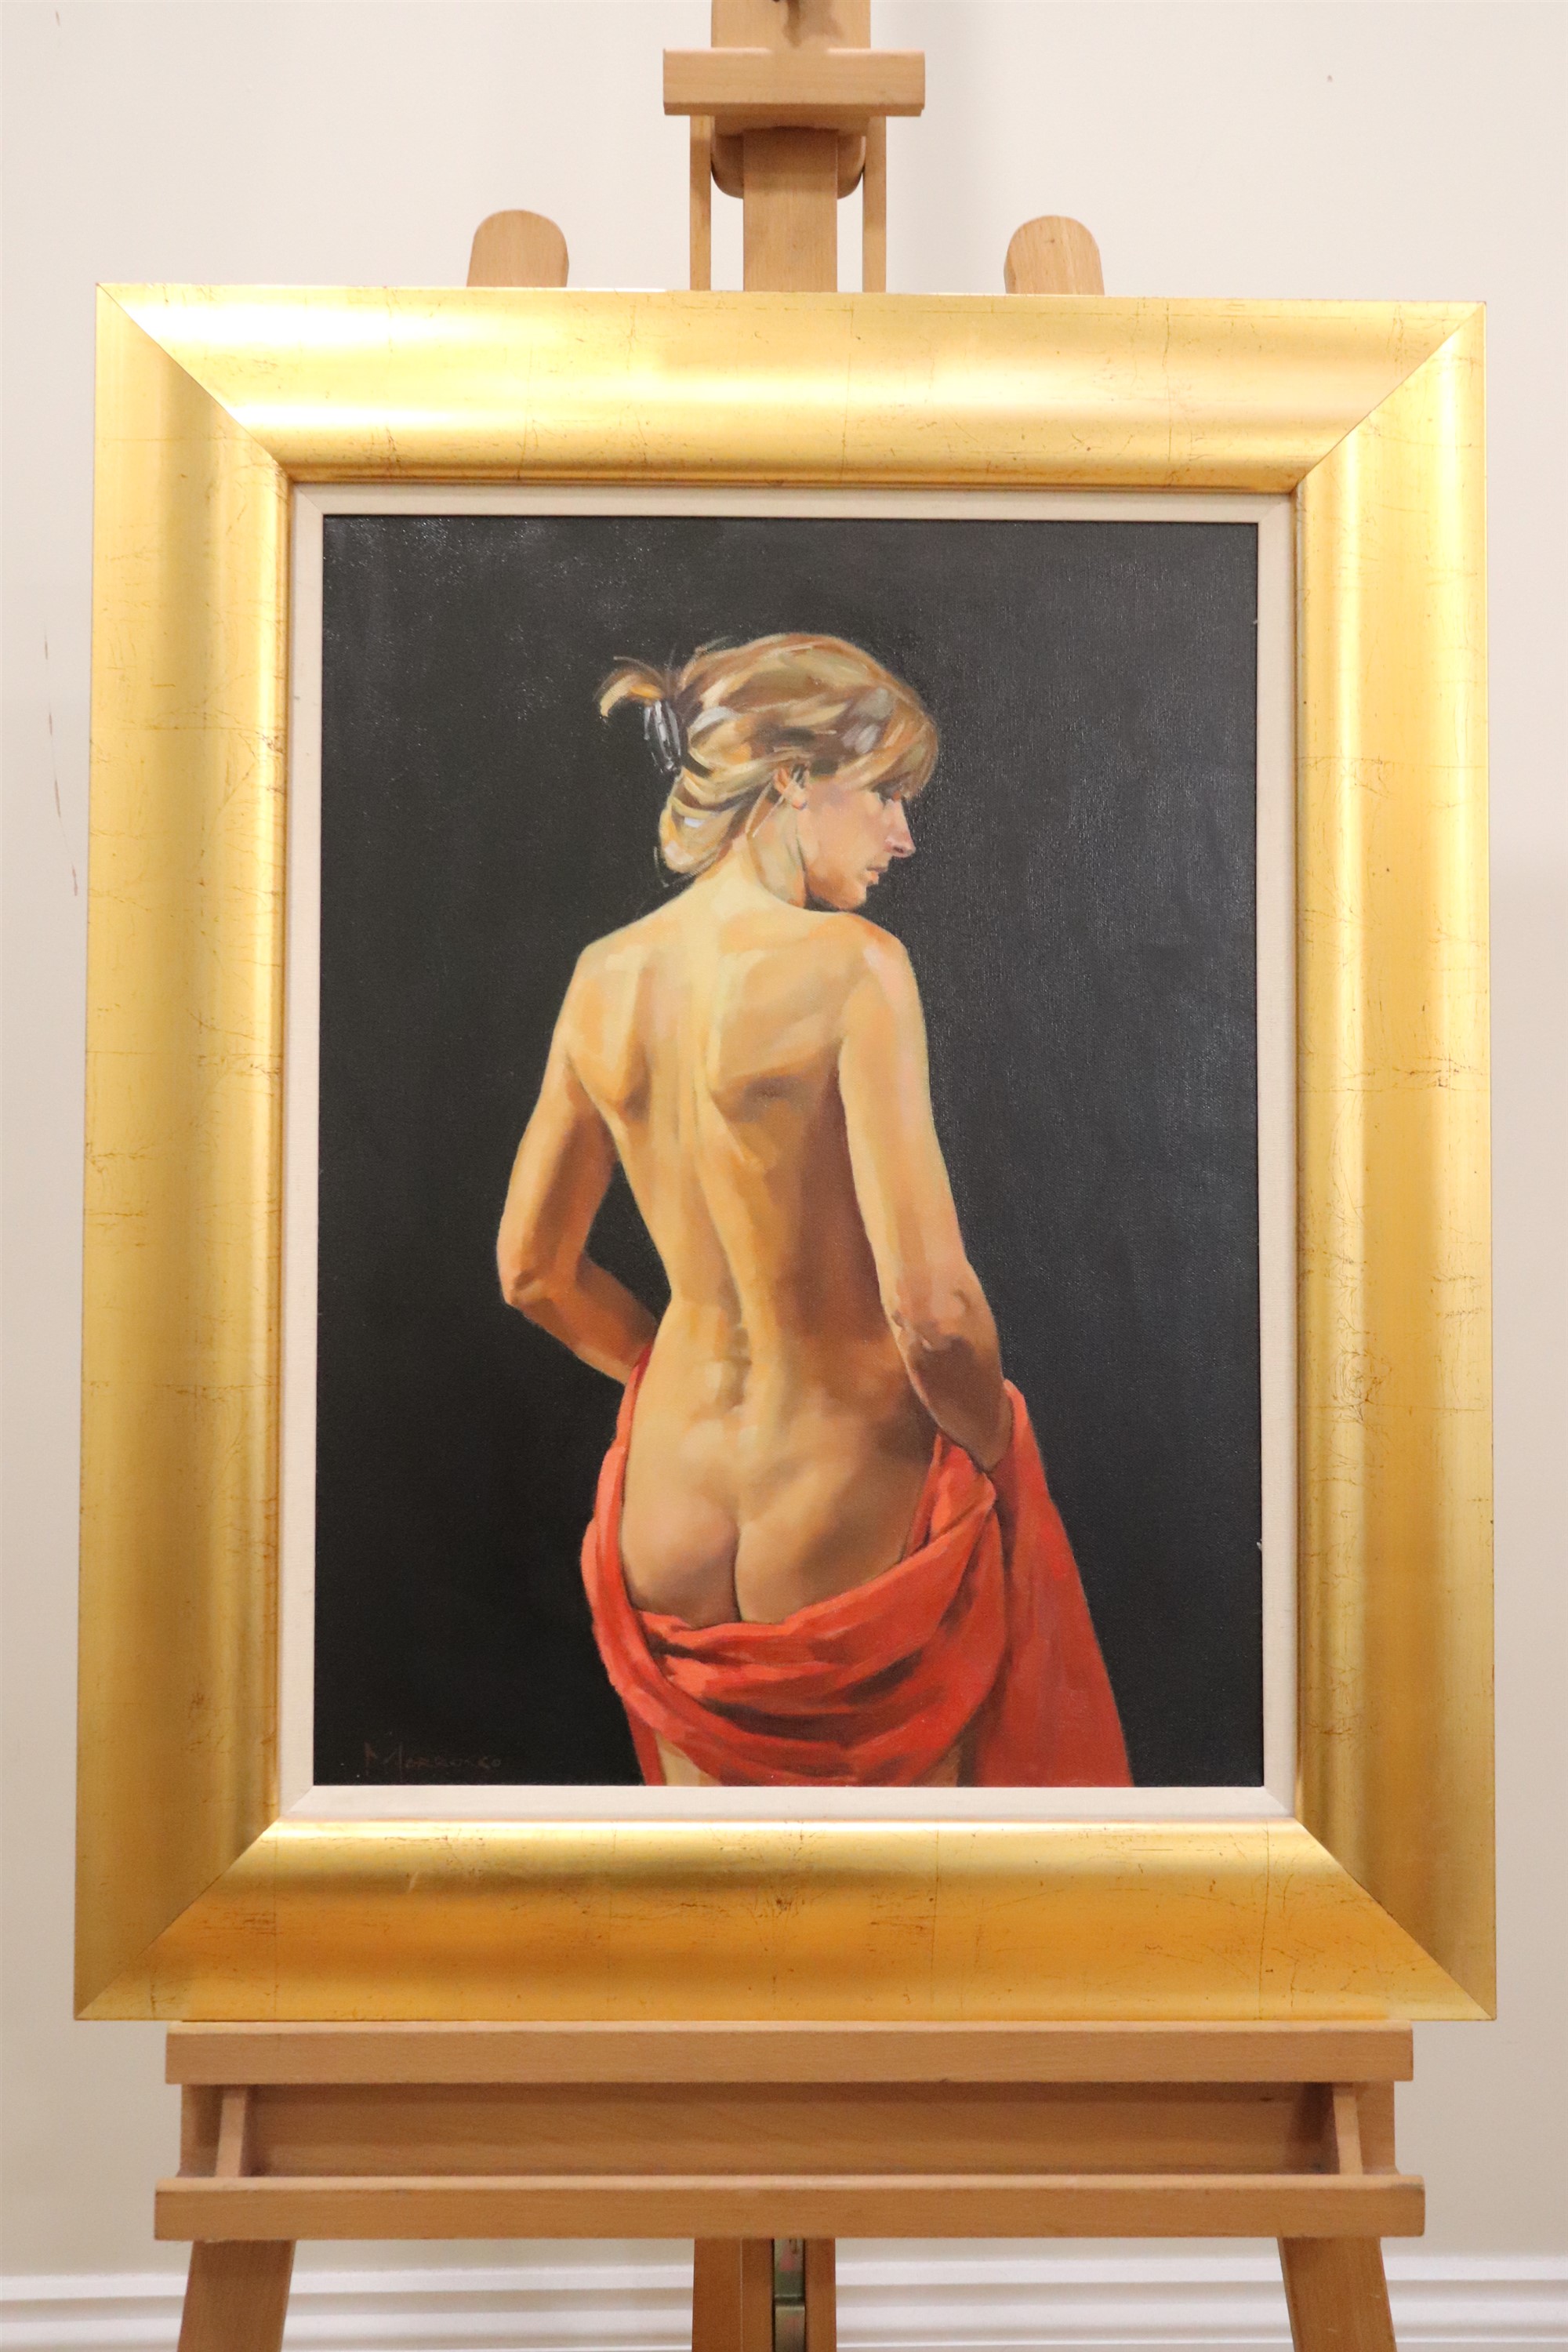 Jack Morrocco (Scottish, Contemporary) "Nude with red drape", chiaroscuro oil on canvas, Thompson' - Image 4 of 4